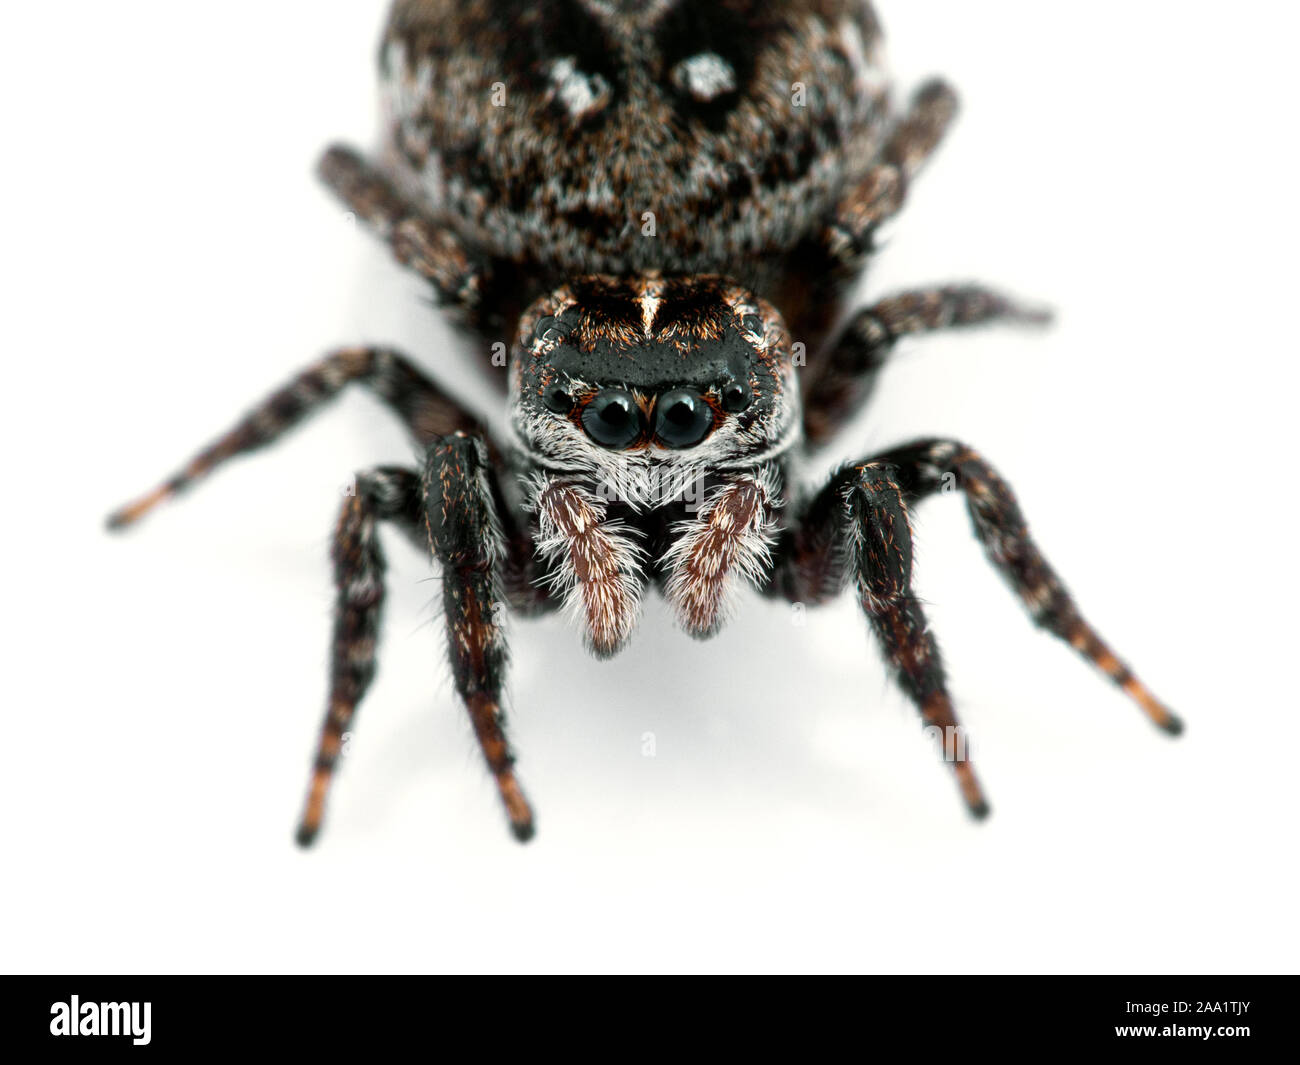 gravid female jumping spider, Calositticus floricola palustris, close-up view of face, isolated Stock Photo